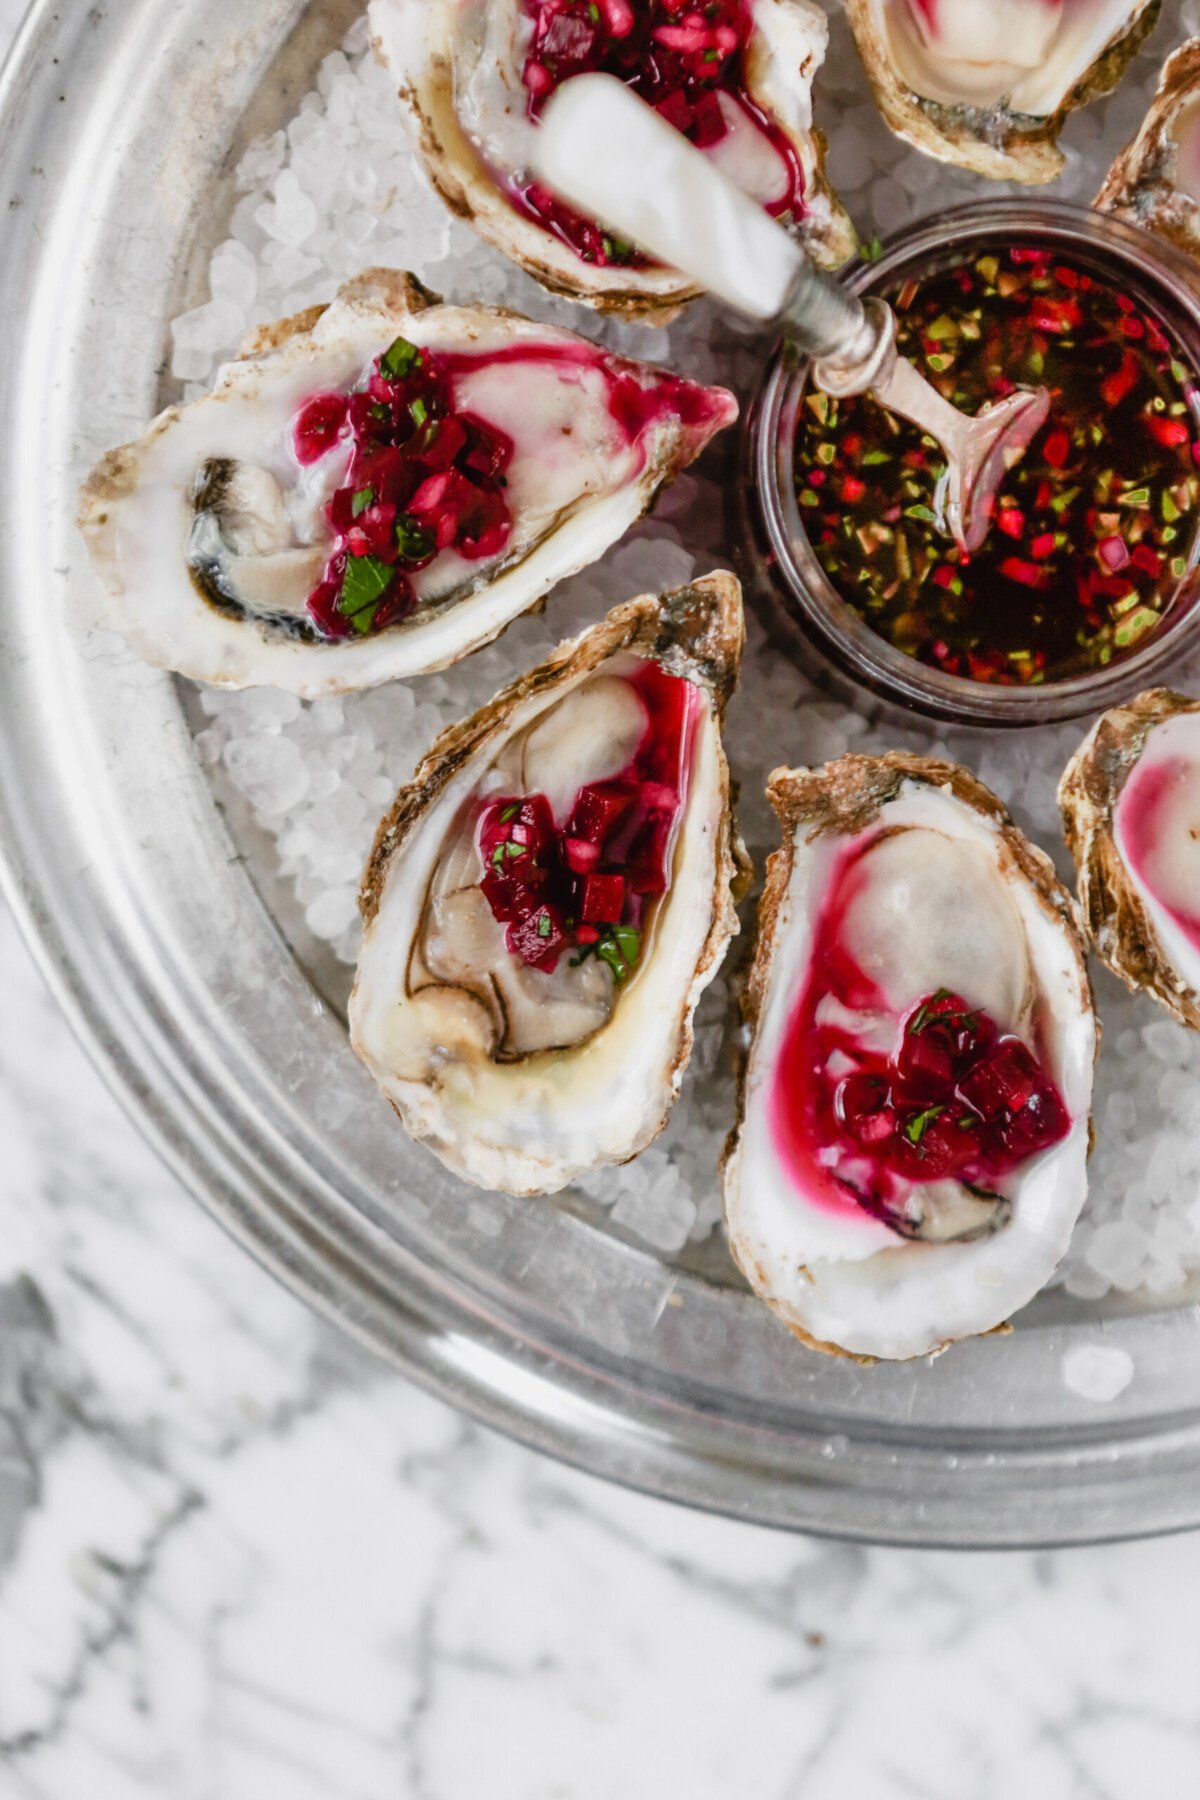 Photograph of oysters on the half shell set on rock salt in a metal pan on a marble surface, topped with a red mignonette sauce.